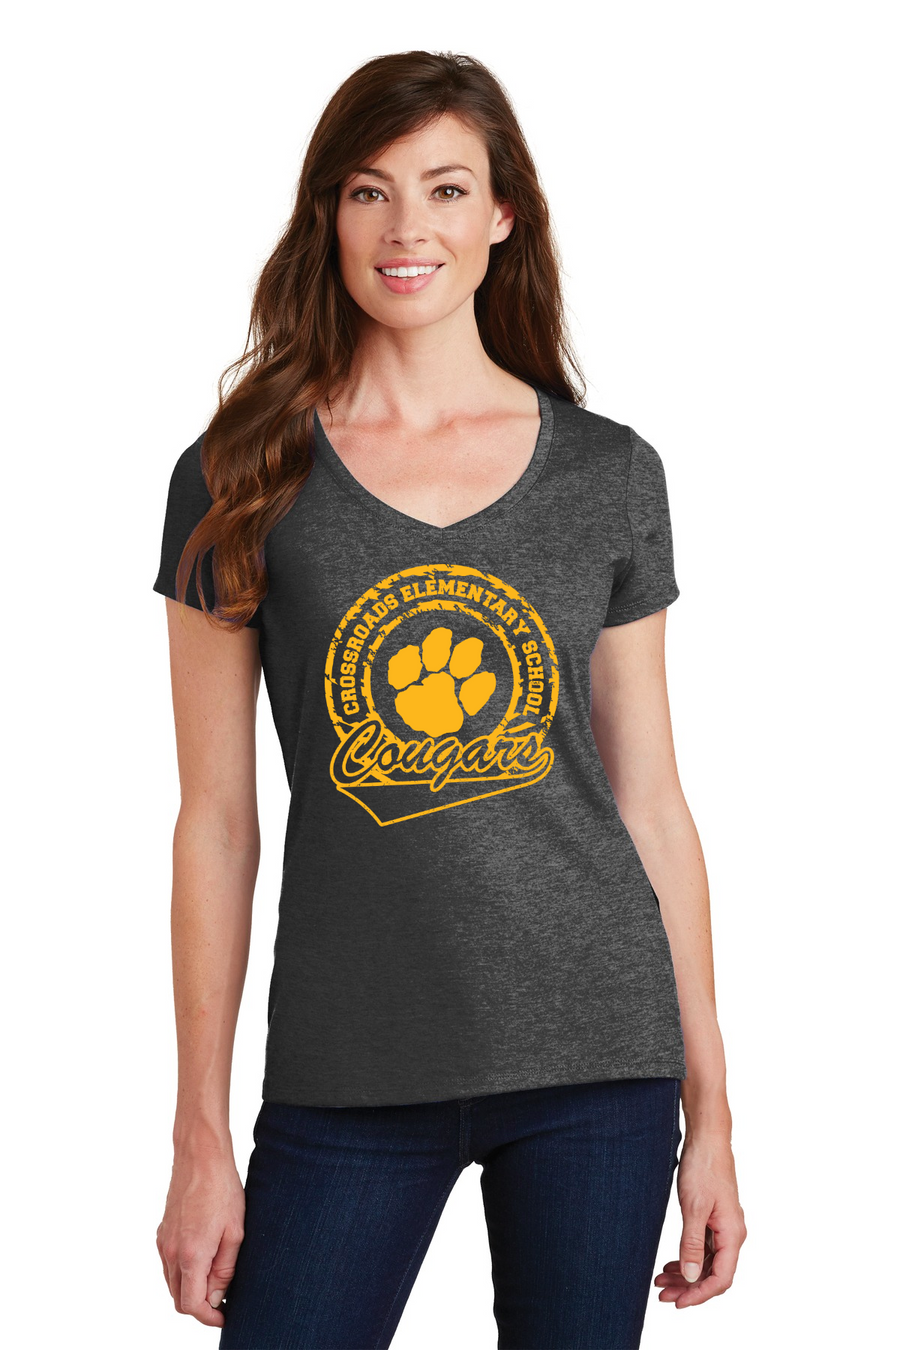 Crossroads Elementary Fall 23/24 On-Demand-Port and Co Ladies V-Neck